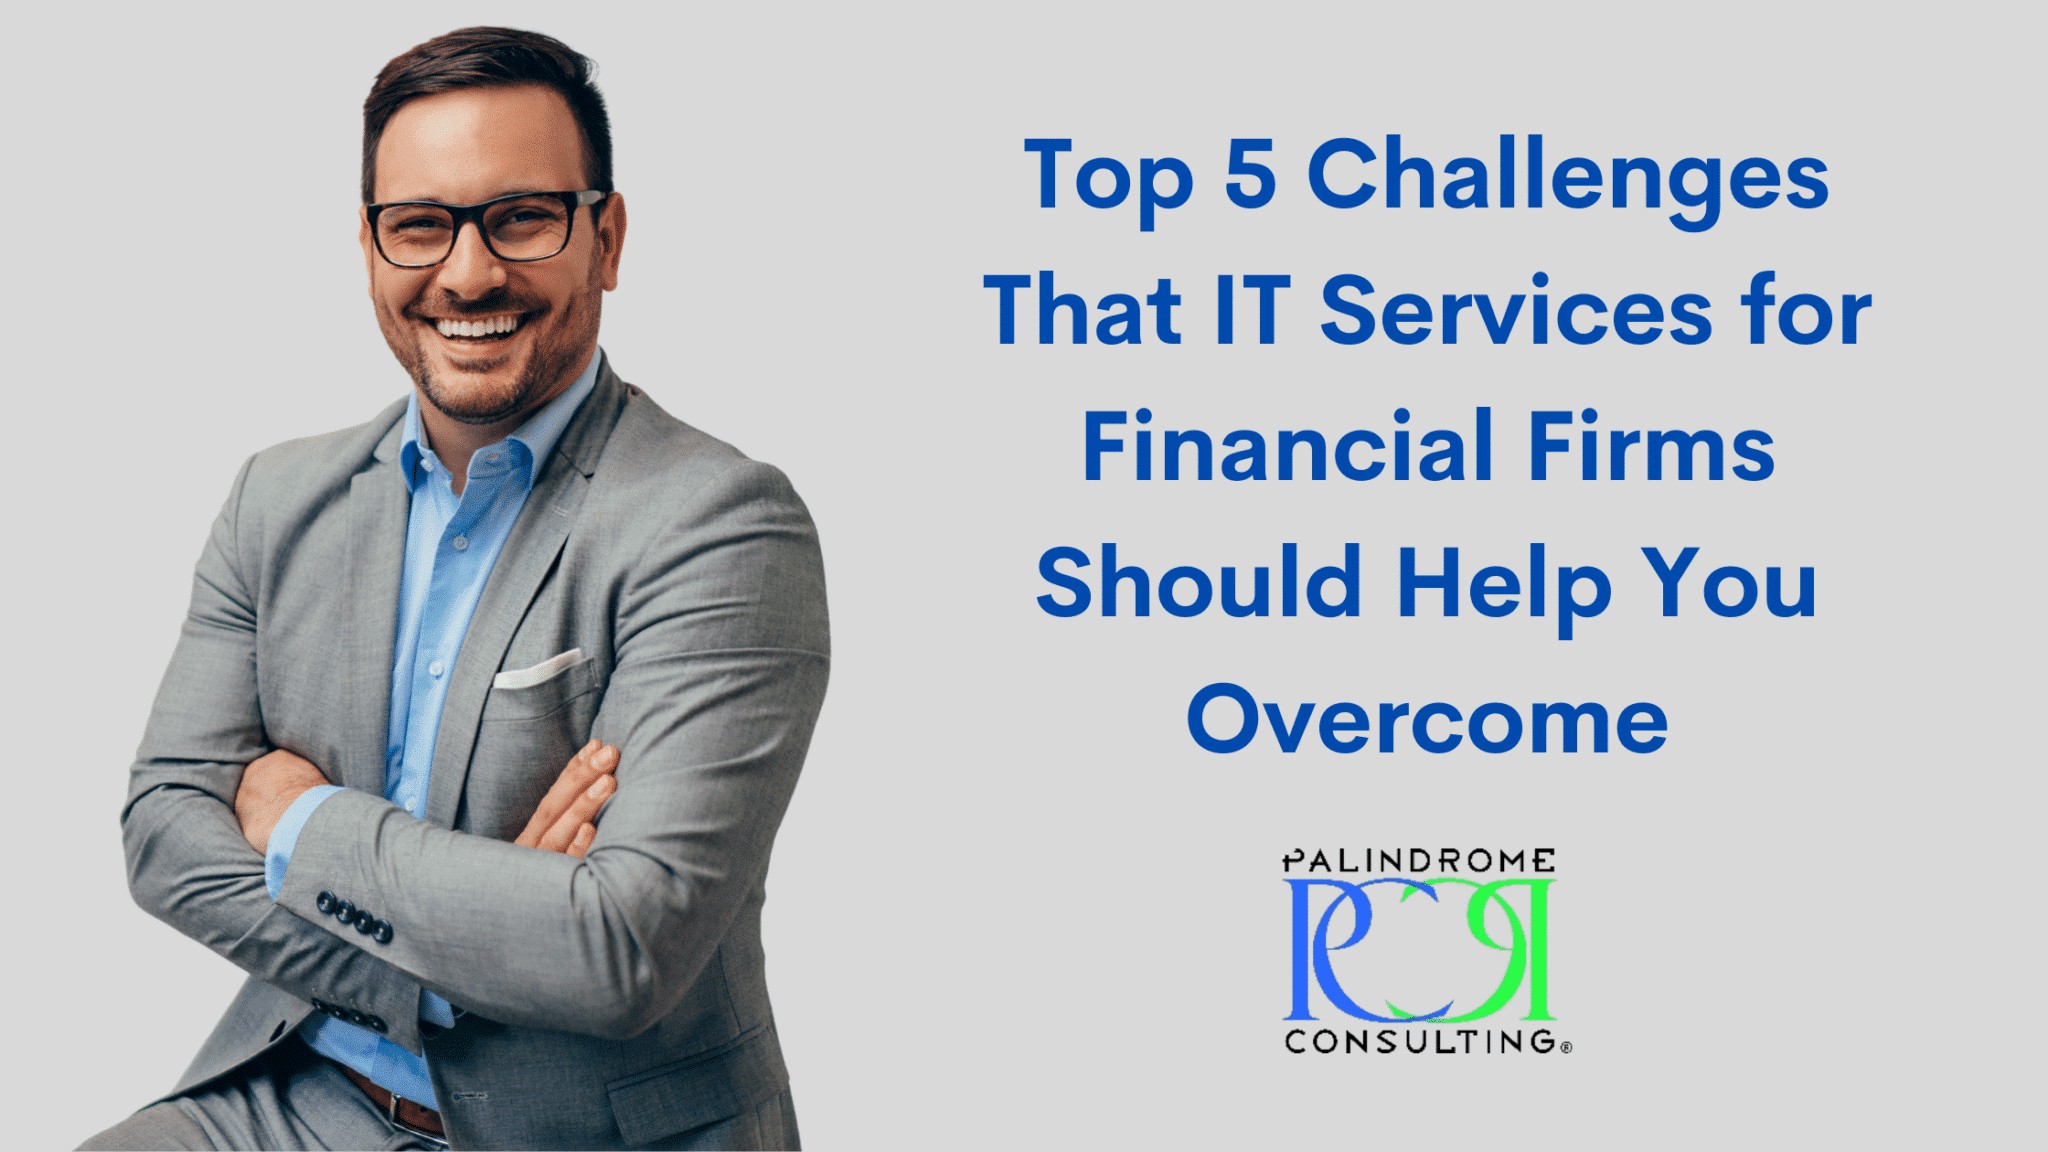 Top 5 Challenges That IT Services for Financial Firms Should Help You Overcome